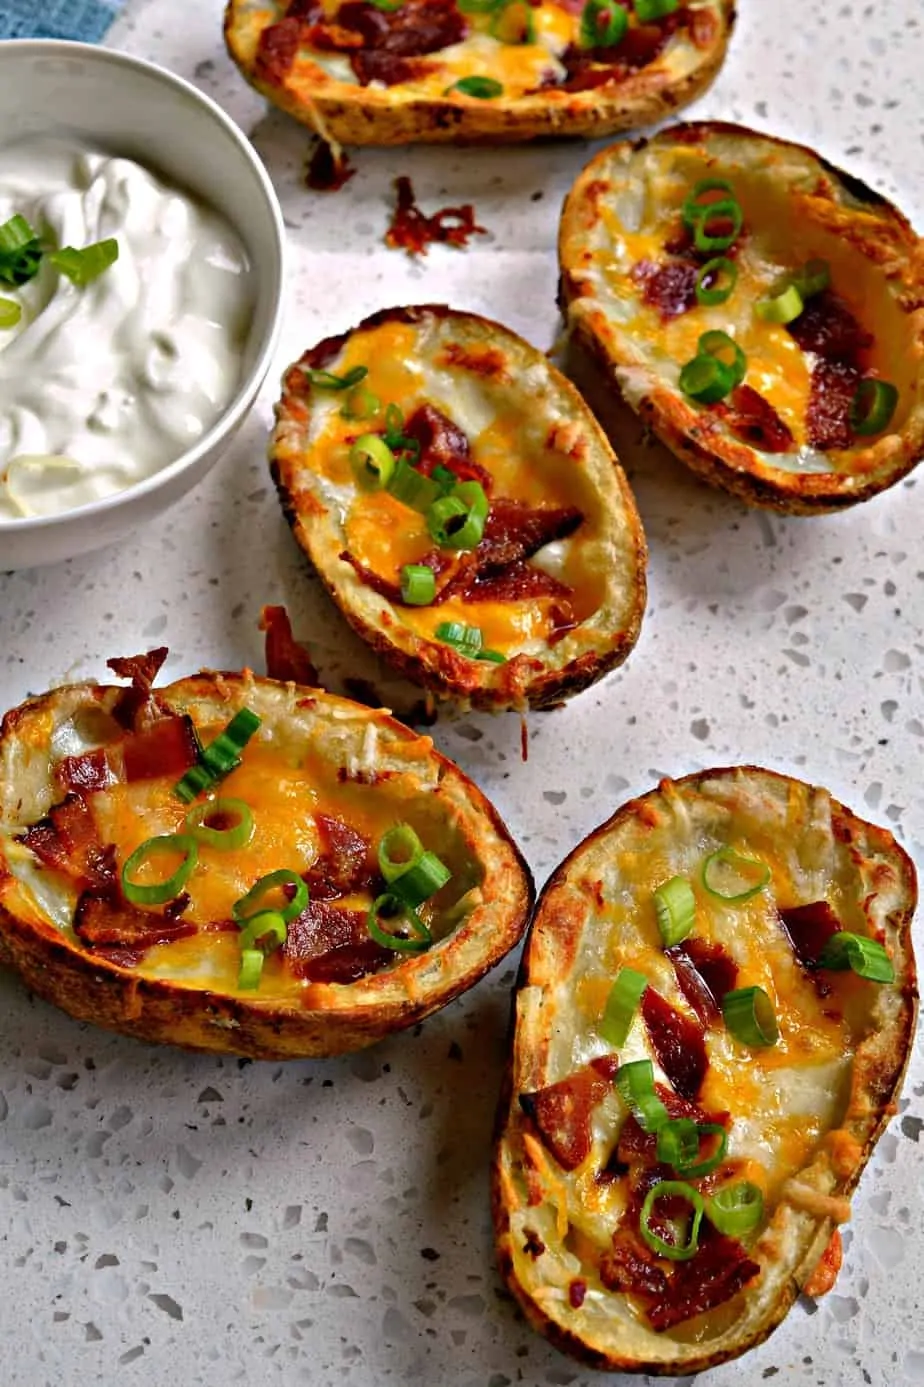 These Crispy Potato skins are topped with smoked bacon, green onions, and plenty of sharp cheddar and Monterey Jack Cheese.